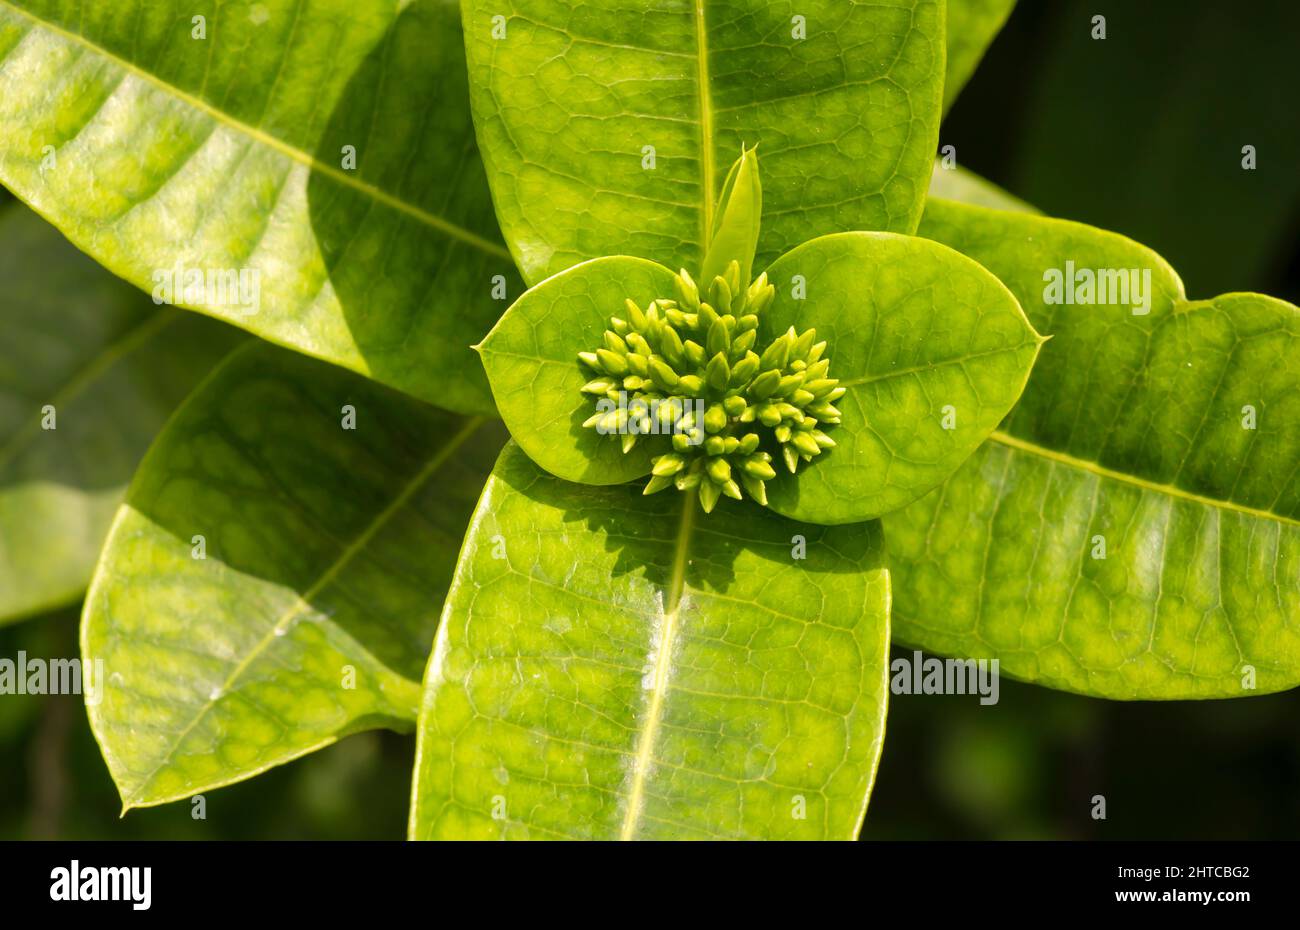 Ixora coccinea flower buds, a species of flowering plant in the family Rubiaceae Stock Photo